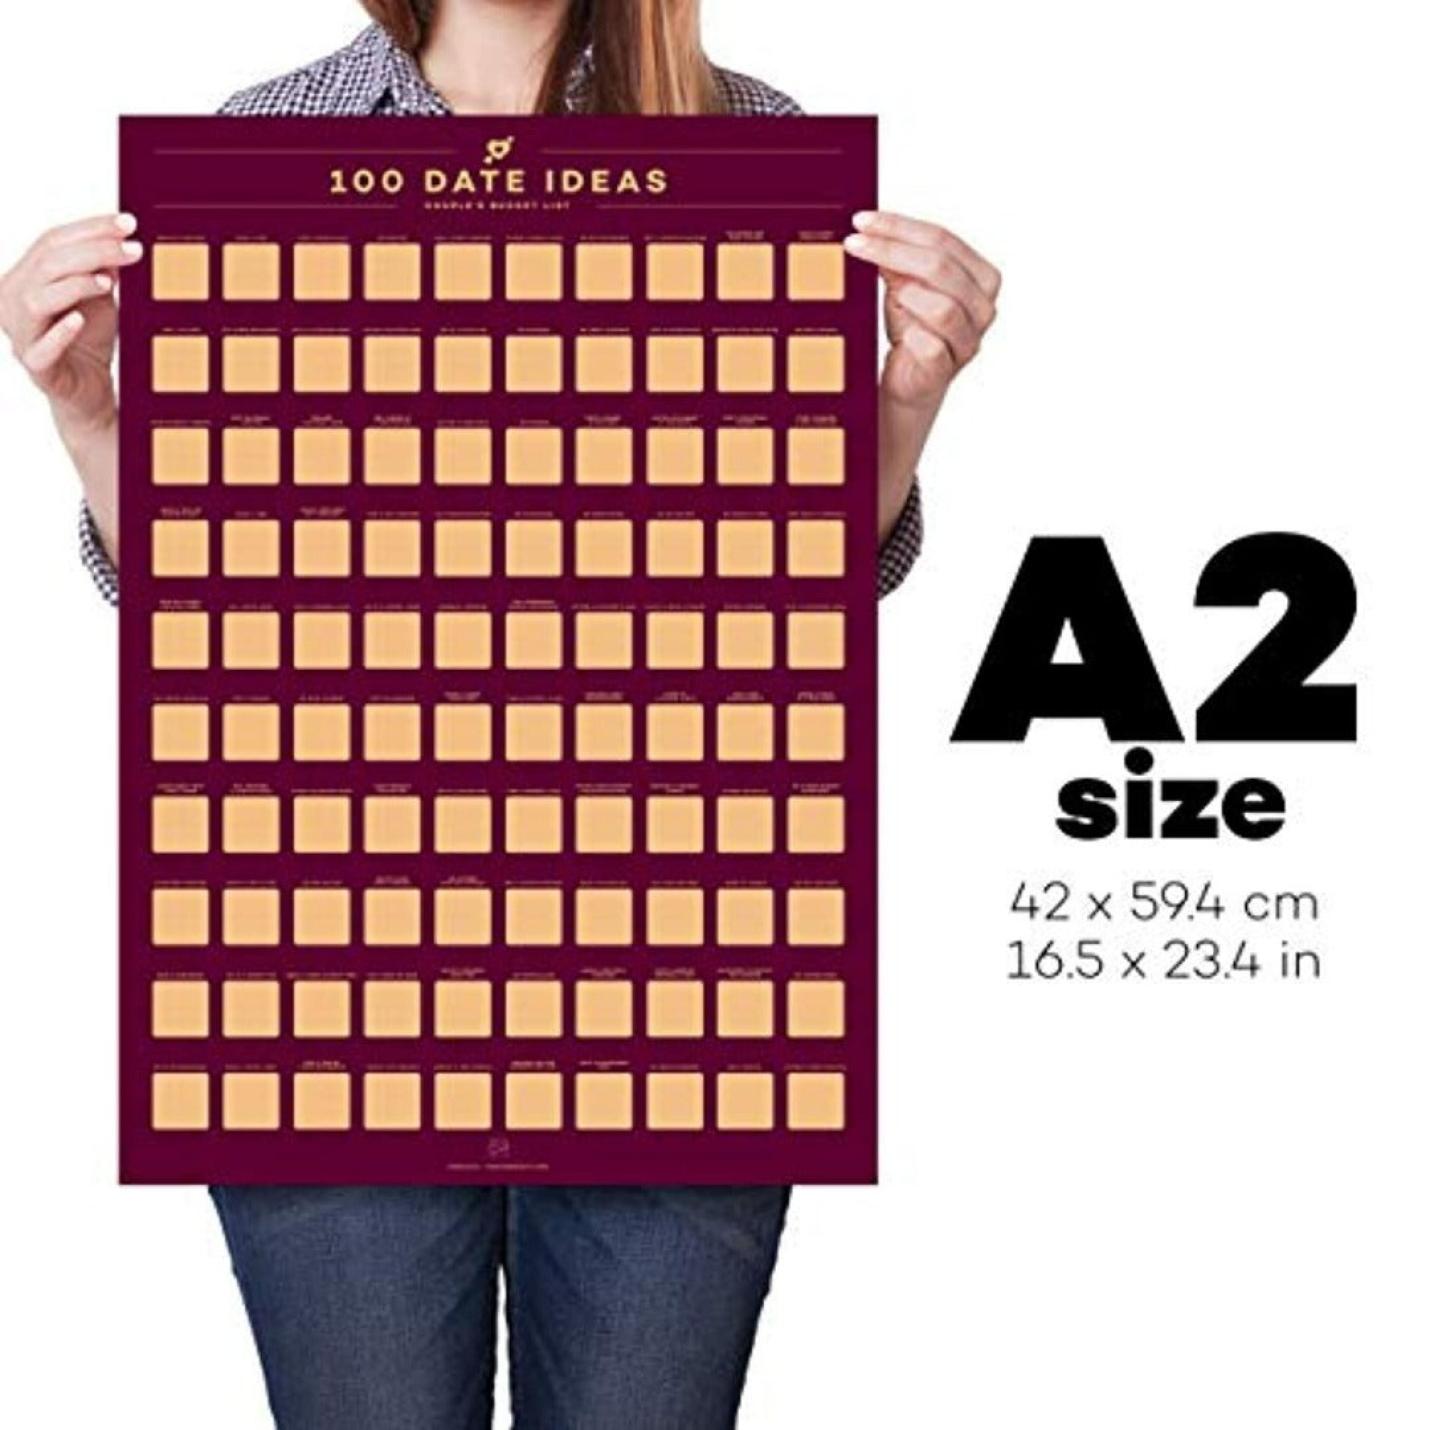 100 Dates Scratch-Off Poster for couples with bucket list ideas and Valentine's Day gift inspiration